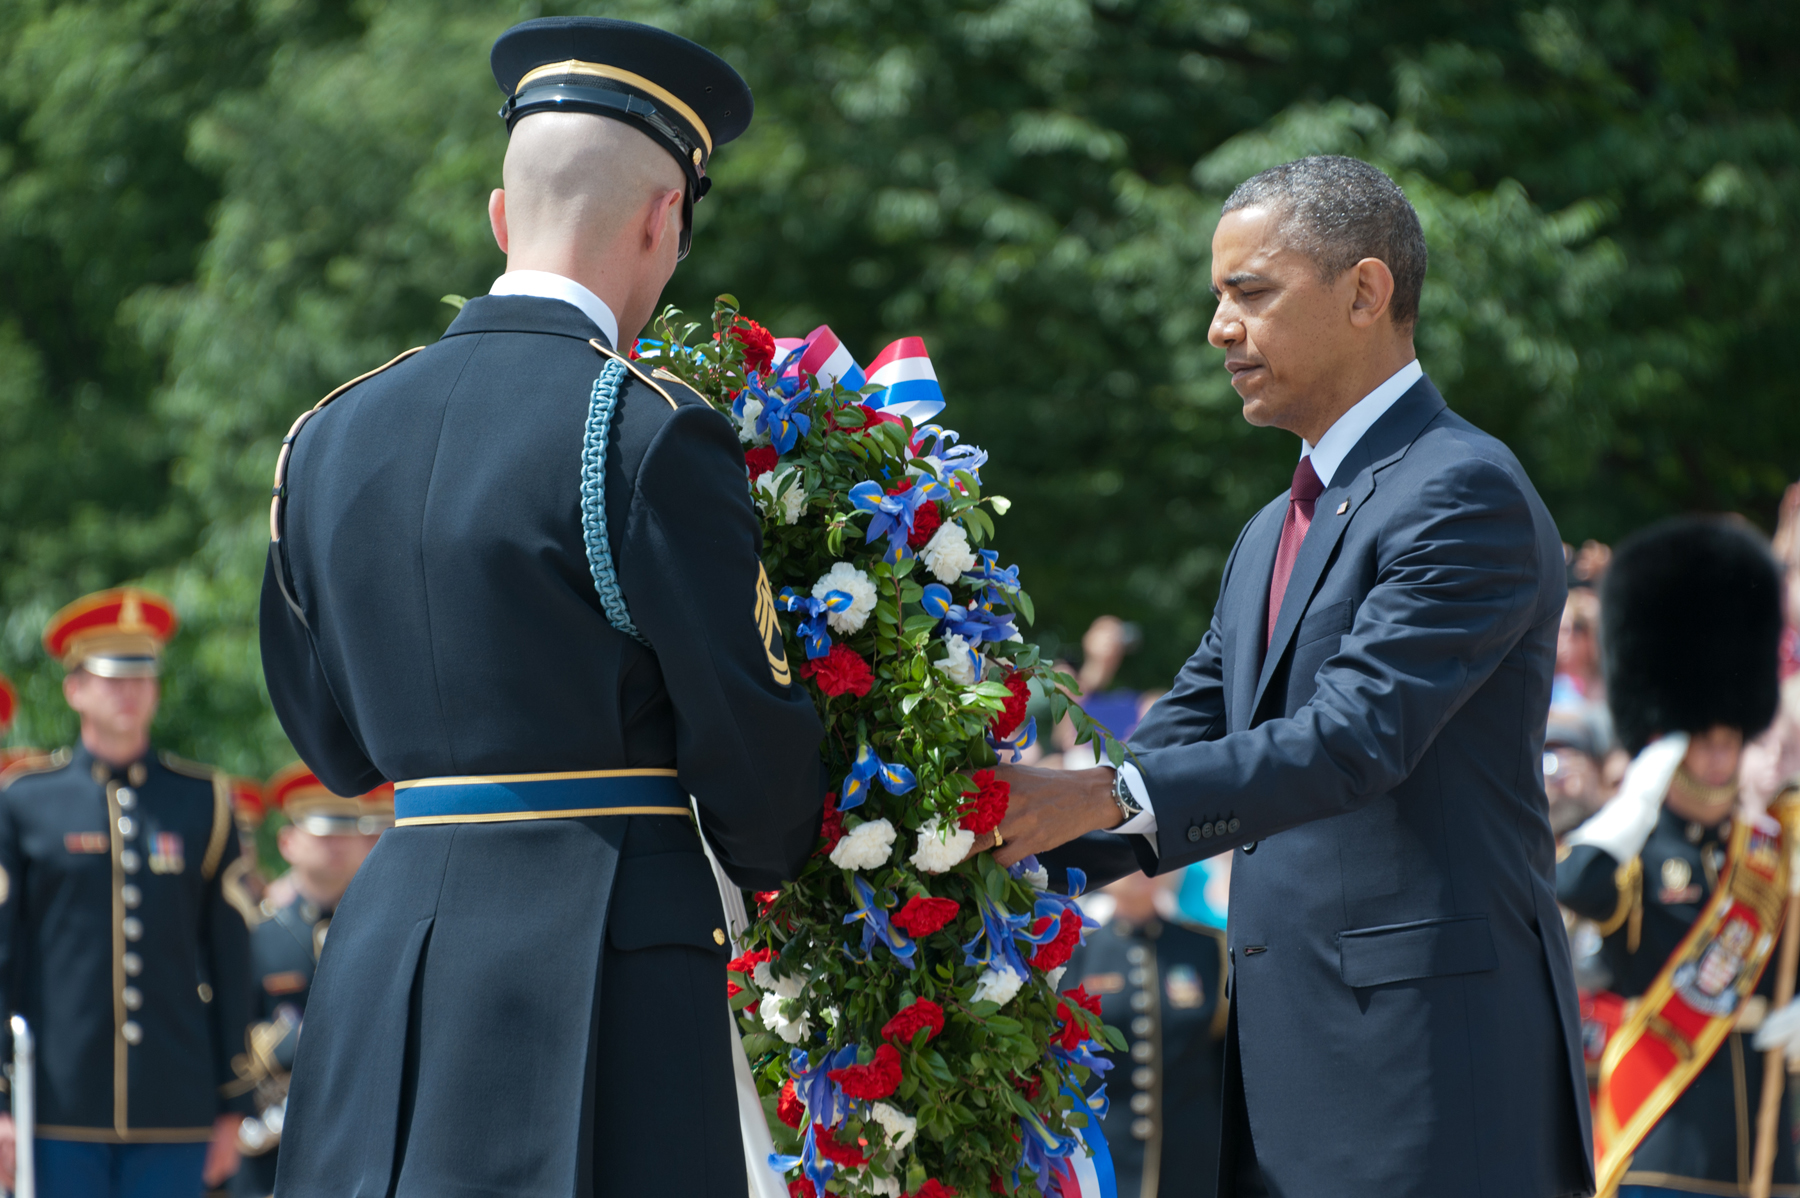 President Barack Obama lays a wreath on the Tomb of the Unknown Soldier during the 2013 Memorial Day ceremony. (Photo: Arlington National Cemetery)